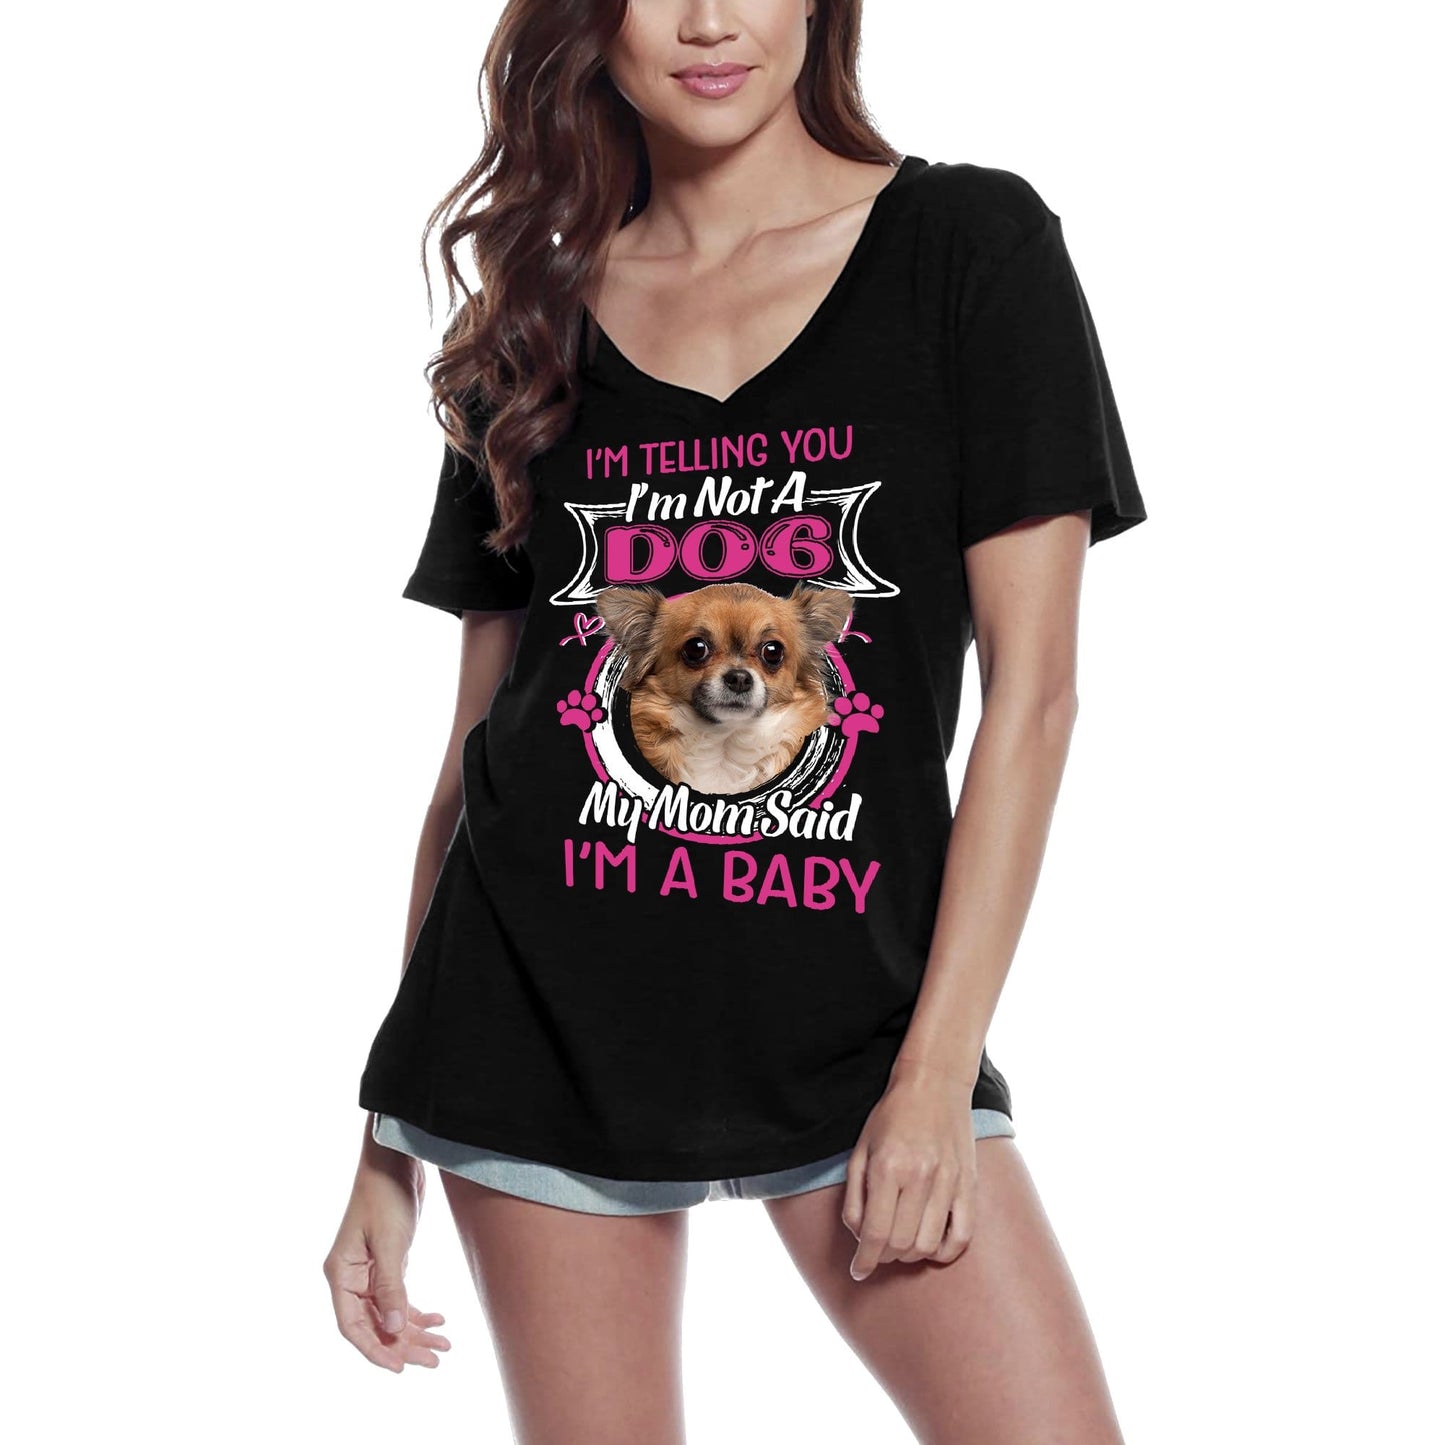 ULTRABASIC Women's T-Shirt I'm Telling You I'm Not a Chihuahua - My Mom Said I'm a Baby - Cute Puppy Dog Lover Tee Shirt